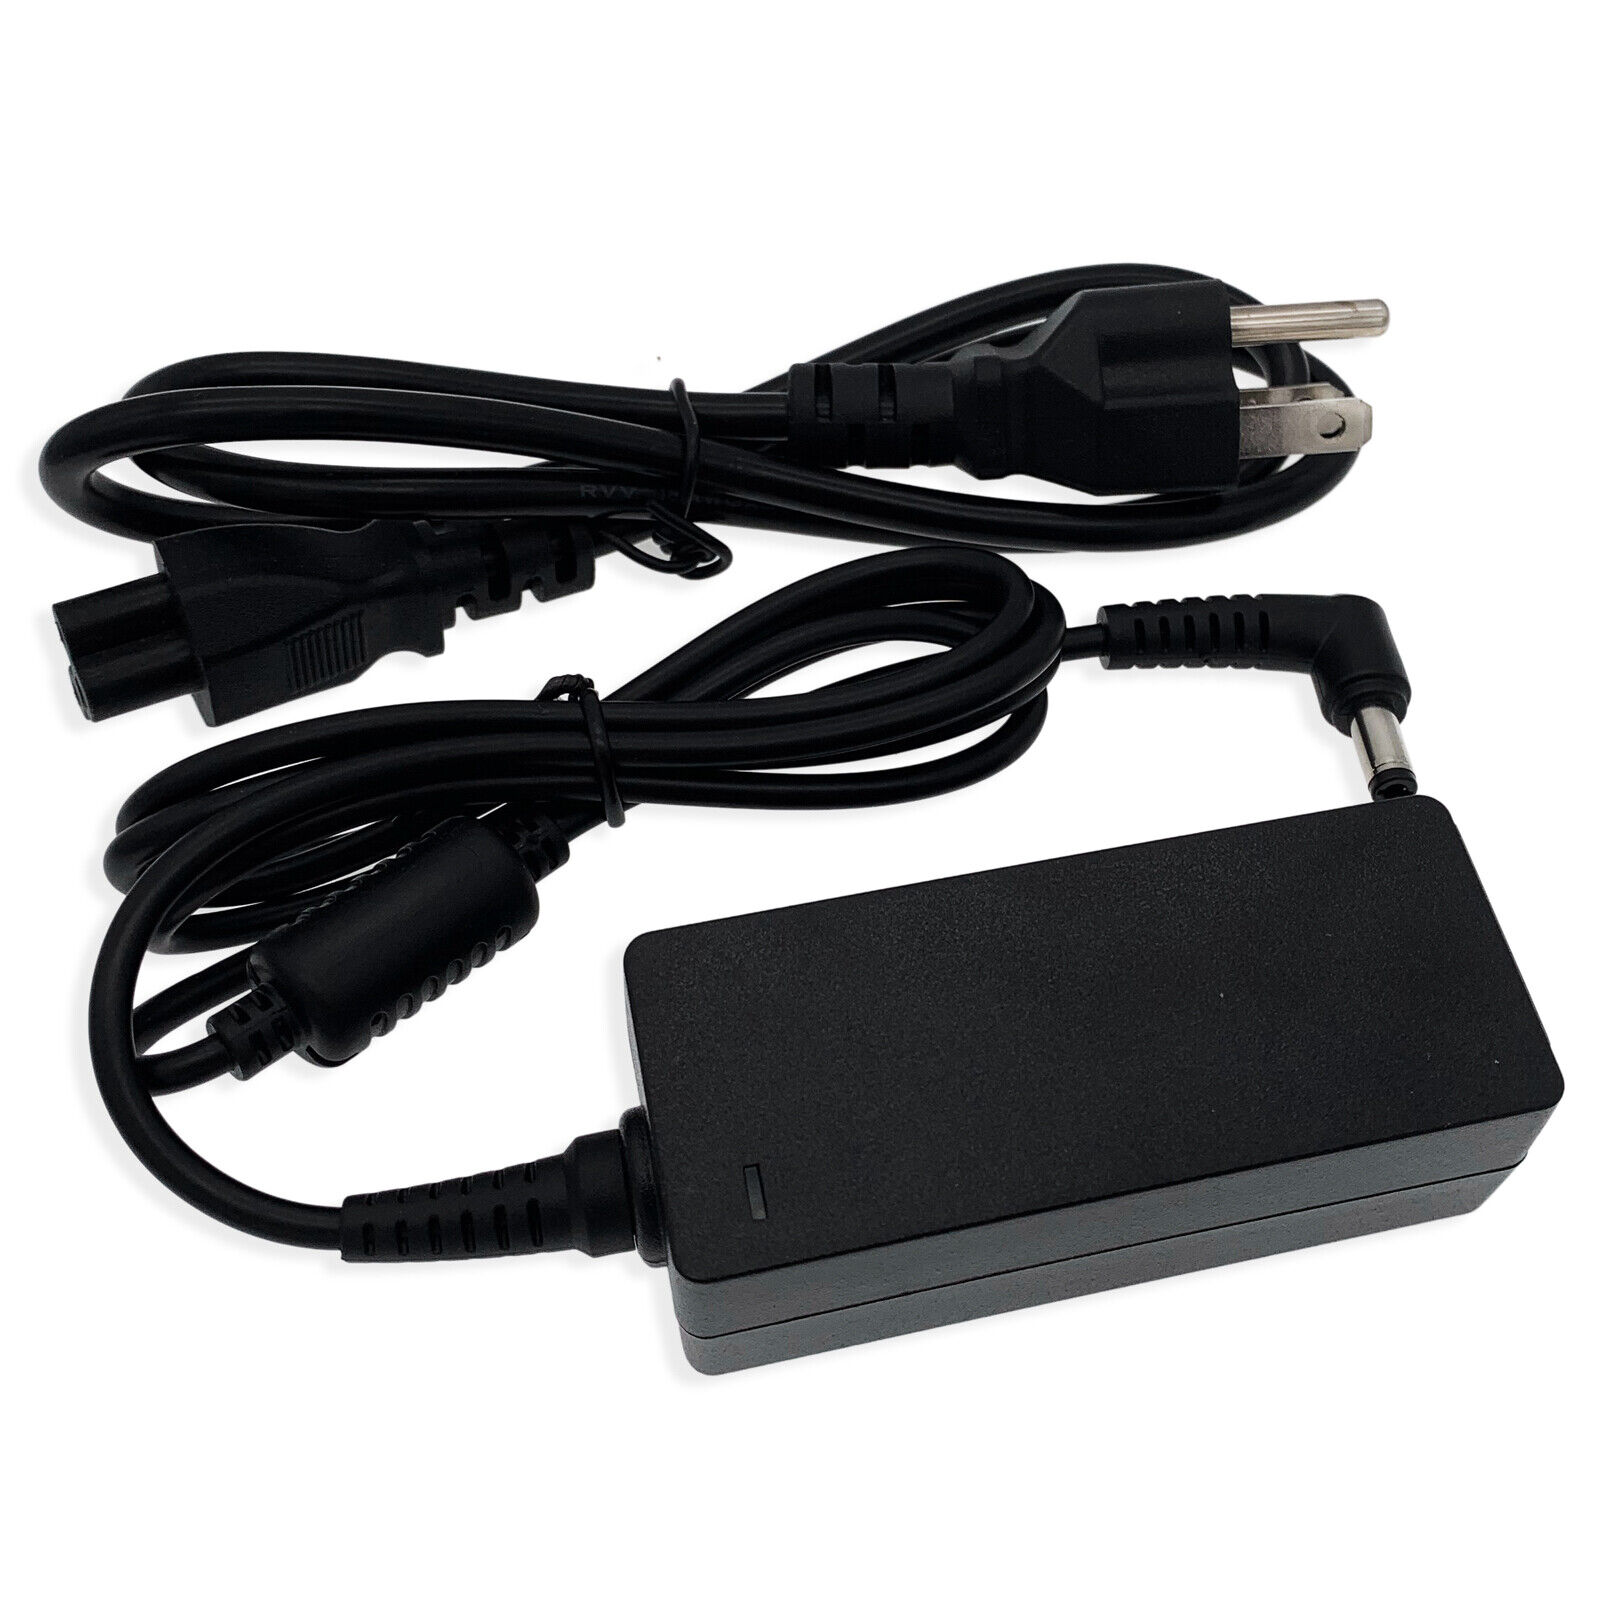 *Brand NEW*ImagineBook MJ401TA 14" Laptop 45W DC 19V 2.37A AC Adapter Charger AD2088320 010LF Power Supply